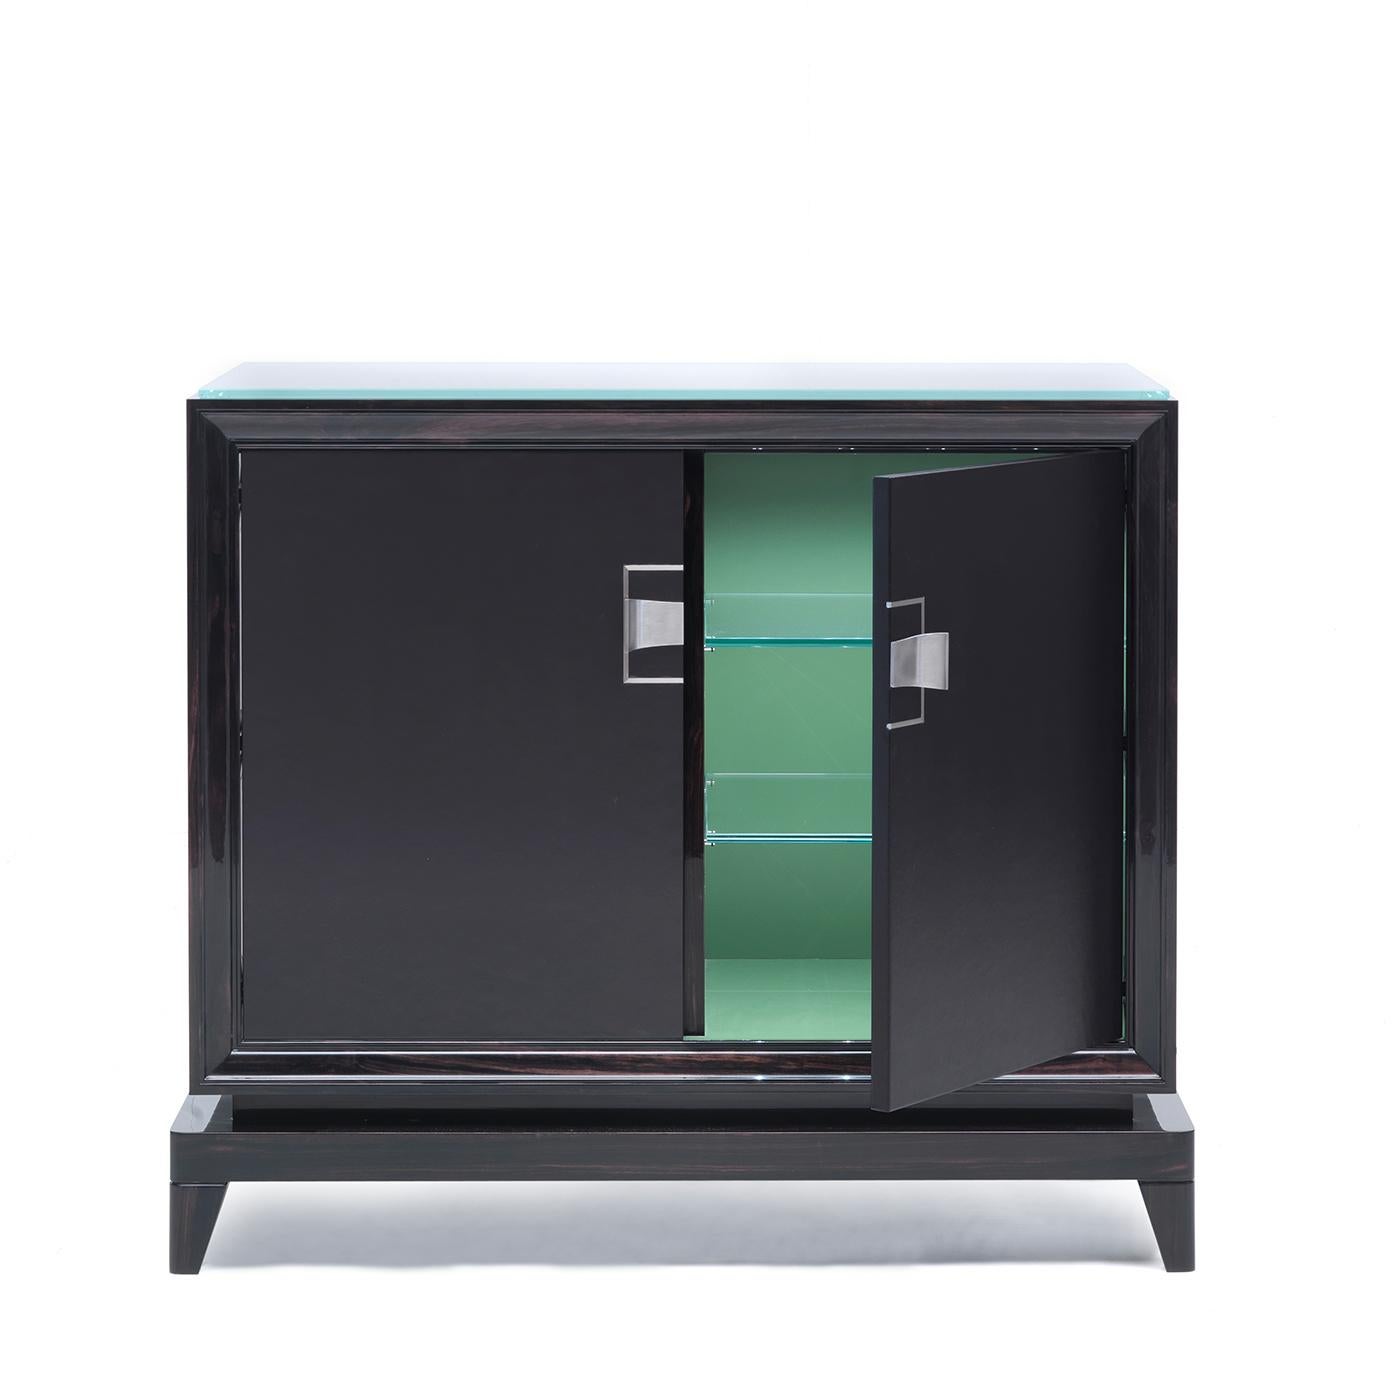 This luxurious two-door bar cabinet in Makassar ebony features two internal shelves in clear glass designed to elegantly store cocktail equipment and exquisite collections of glasses. The sophisticated silhouette that it bears is a triumph of the